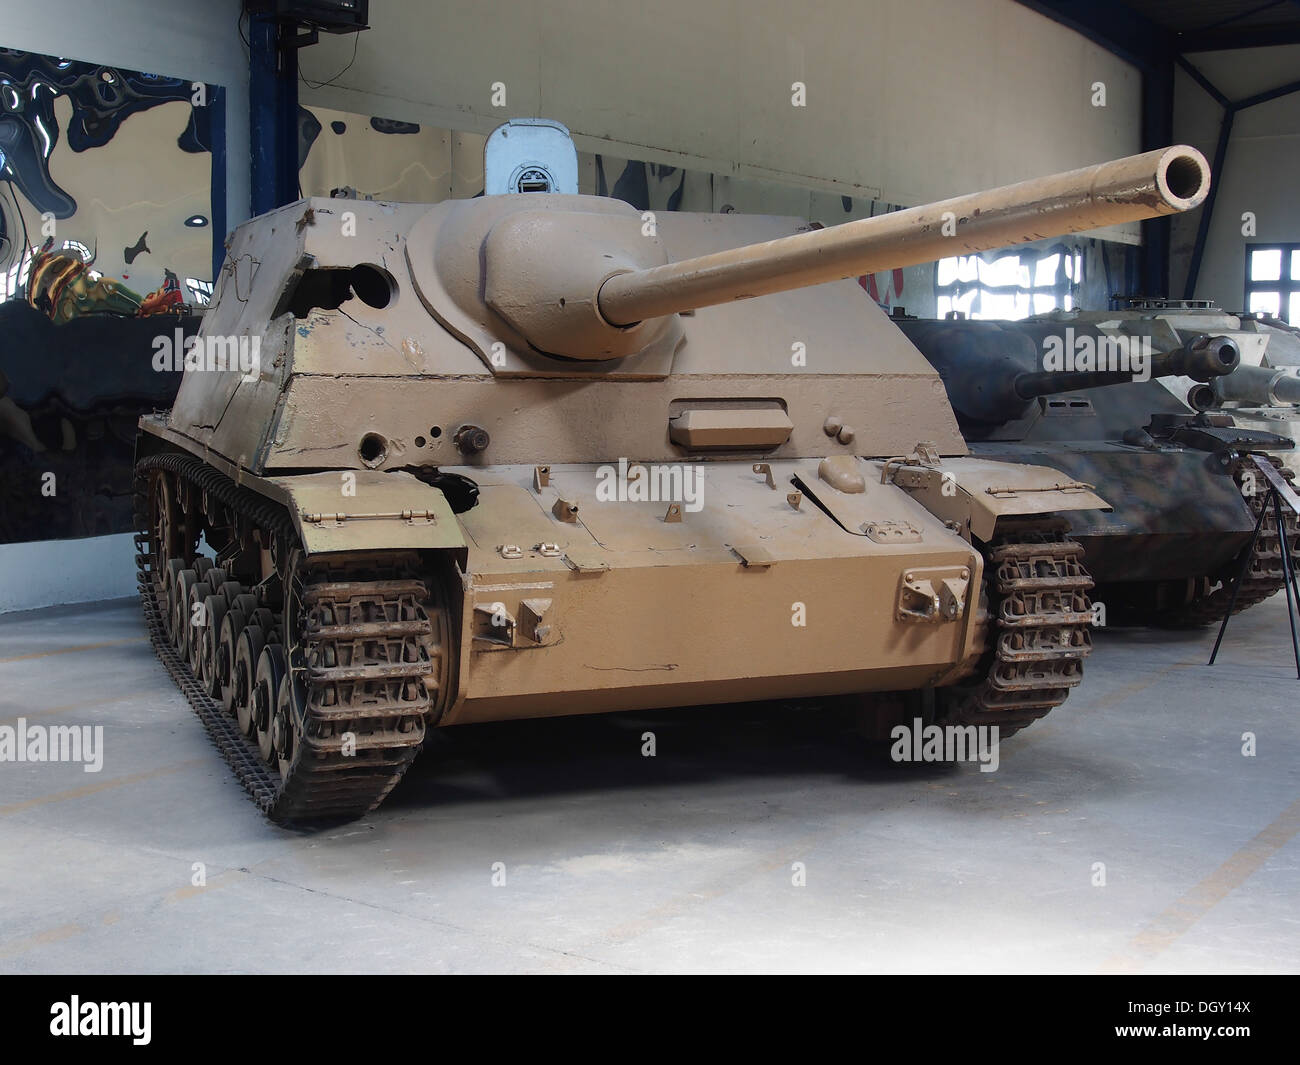 Sd.Kfz. 162-1 Jagdpanzer IV-70(A) in the tank museum, Saumur, France, pic-2 Sd.Kfz. 162/1 Jagdpanzer IV/70(A) Stock Photo